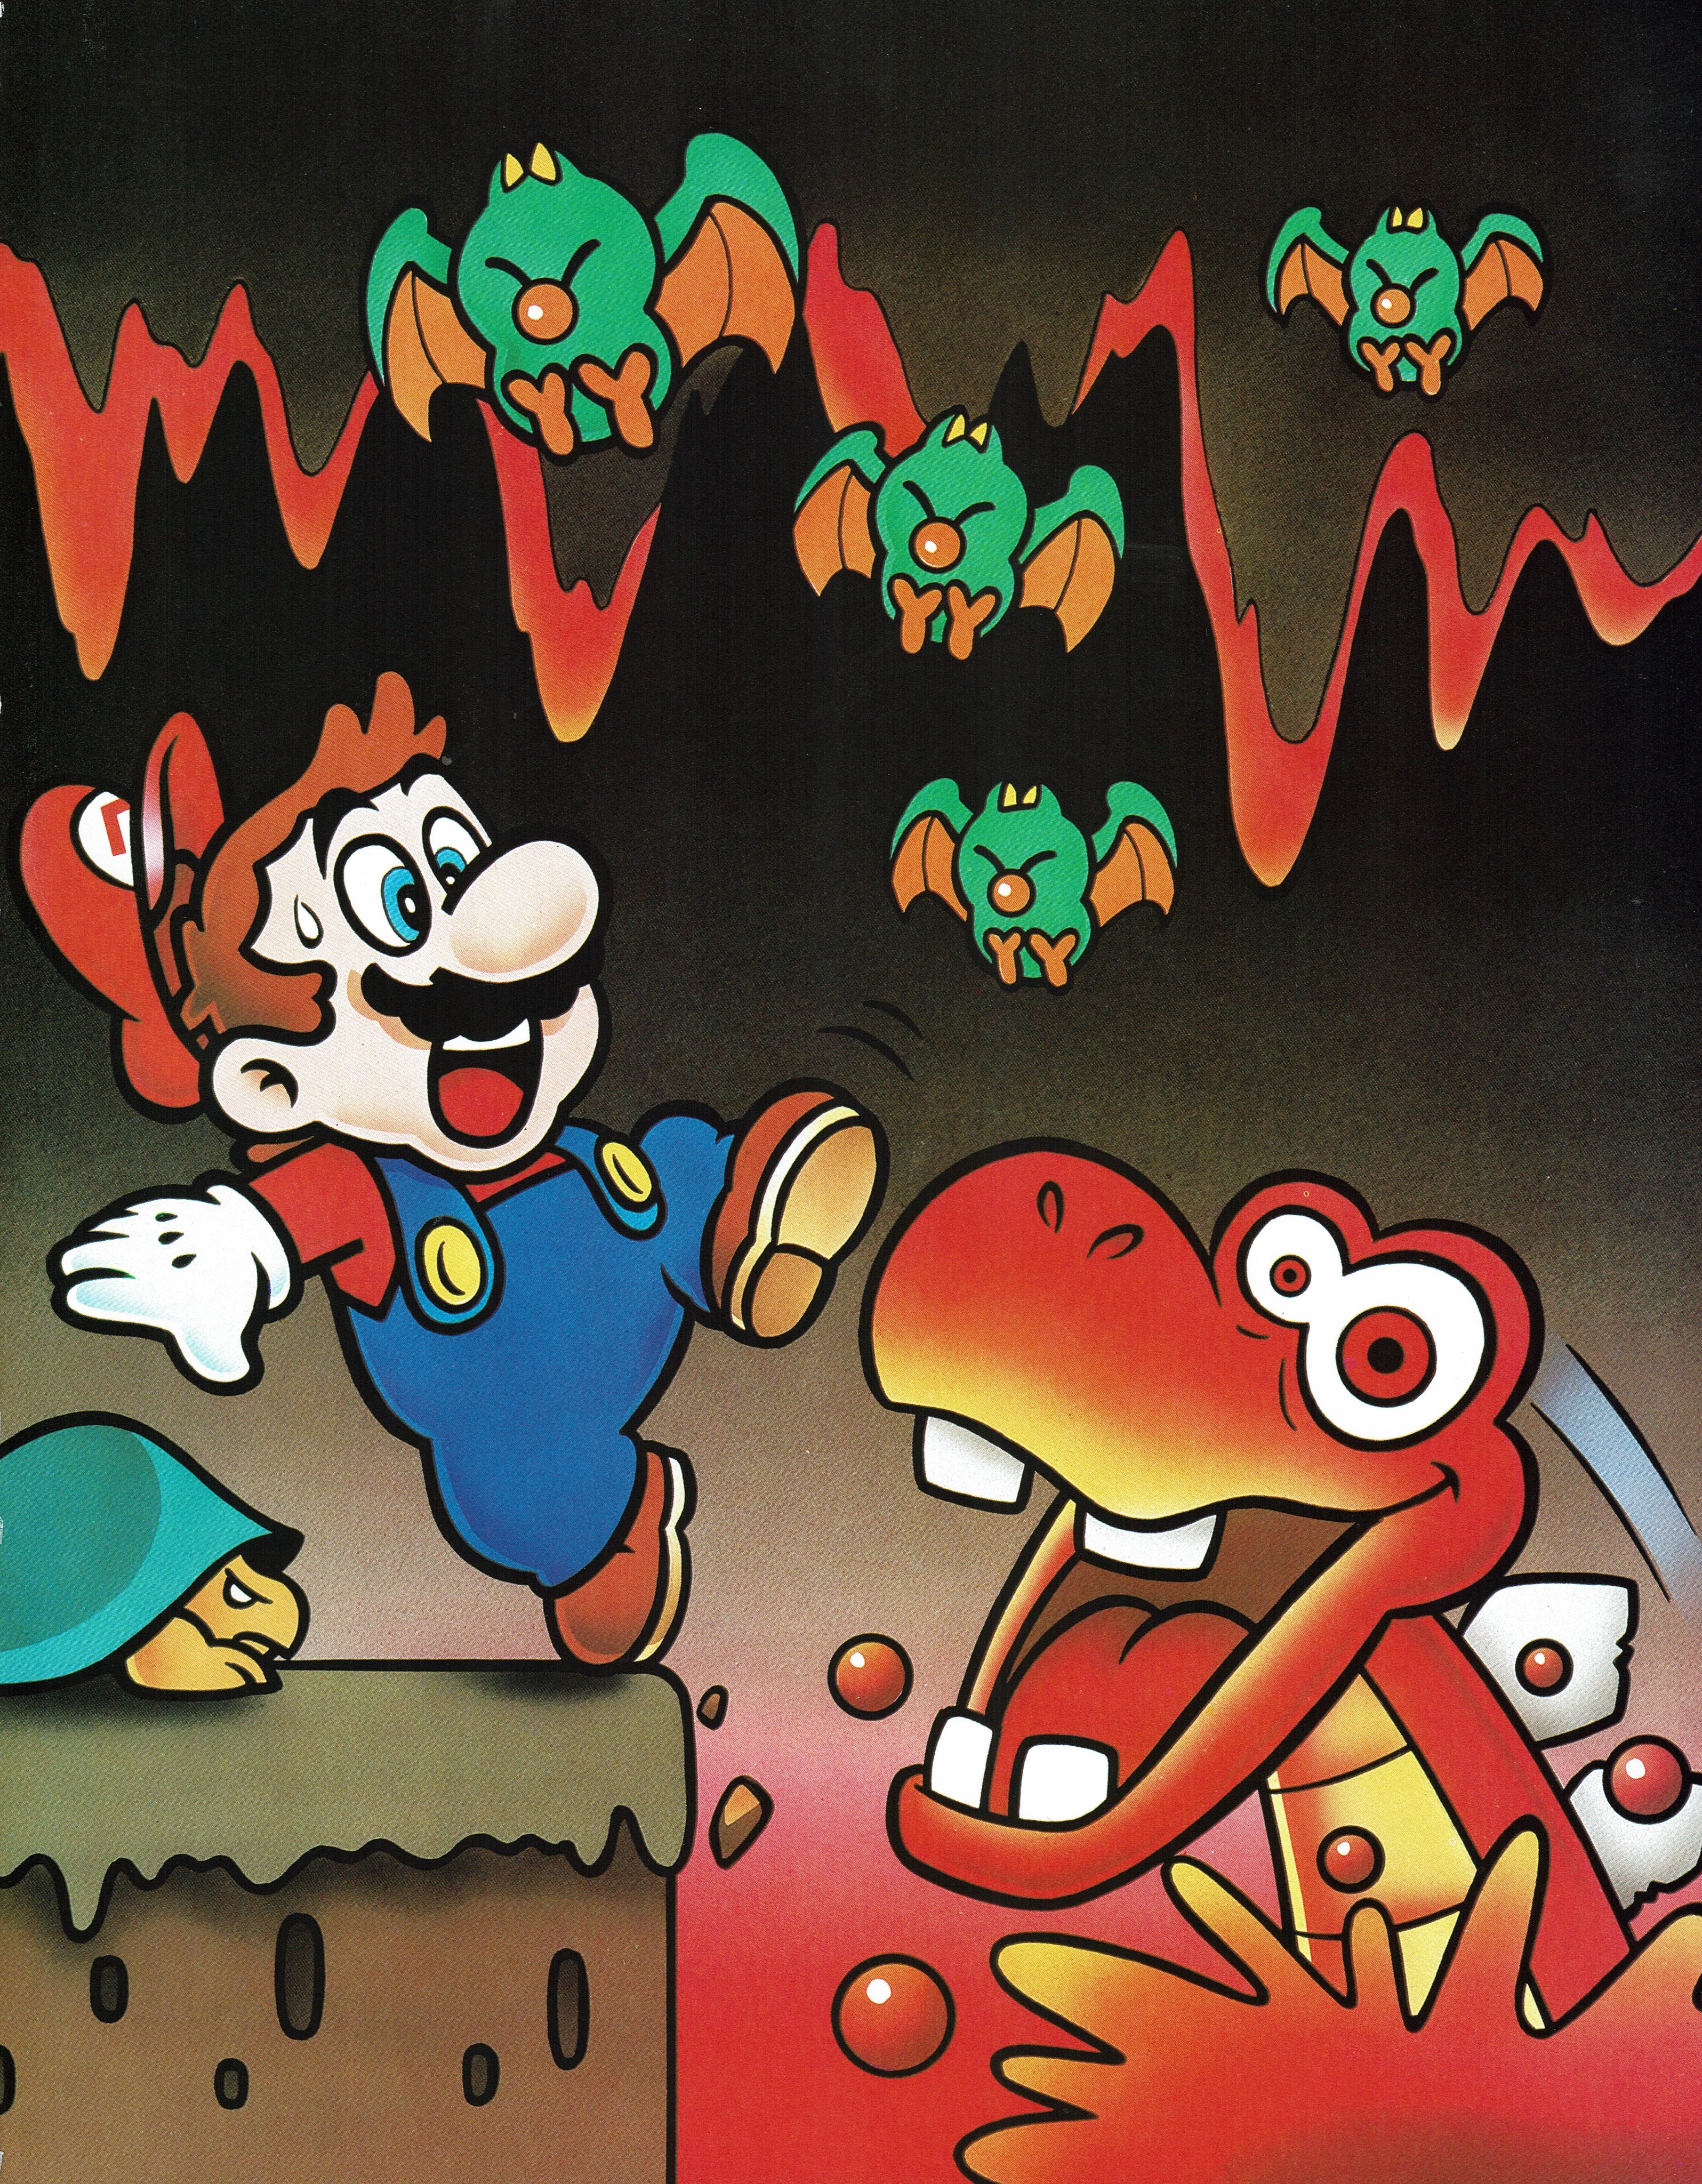 Artwork of Mario encountering a Blargg in a lava cavern in Super Mario World; some Swoopers are flying at Mario.